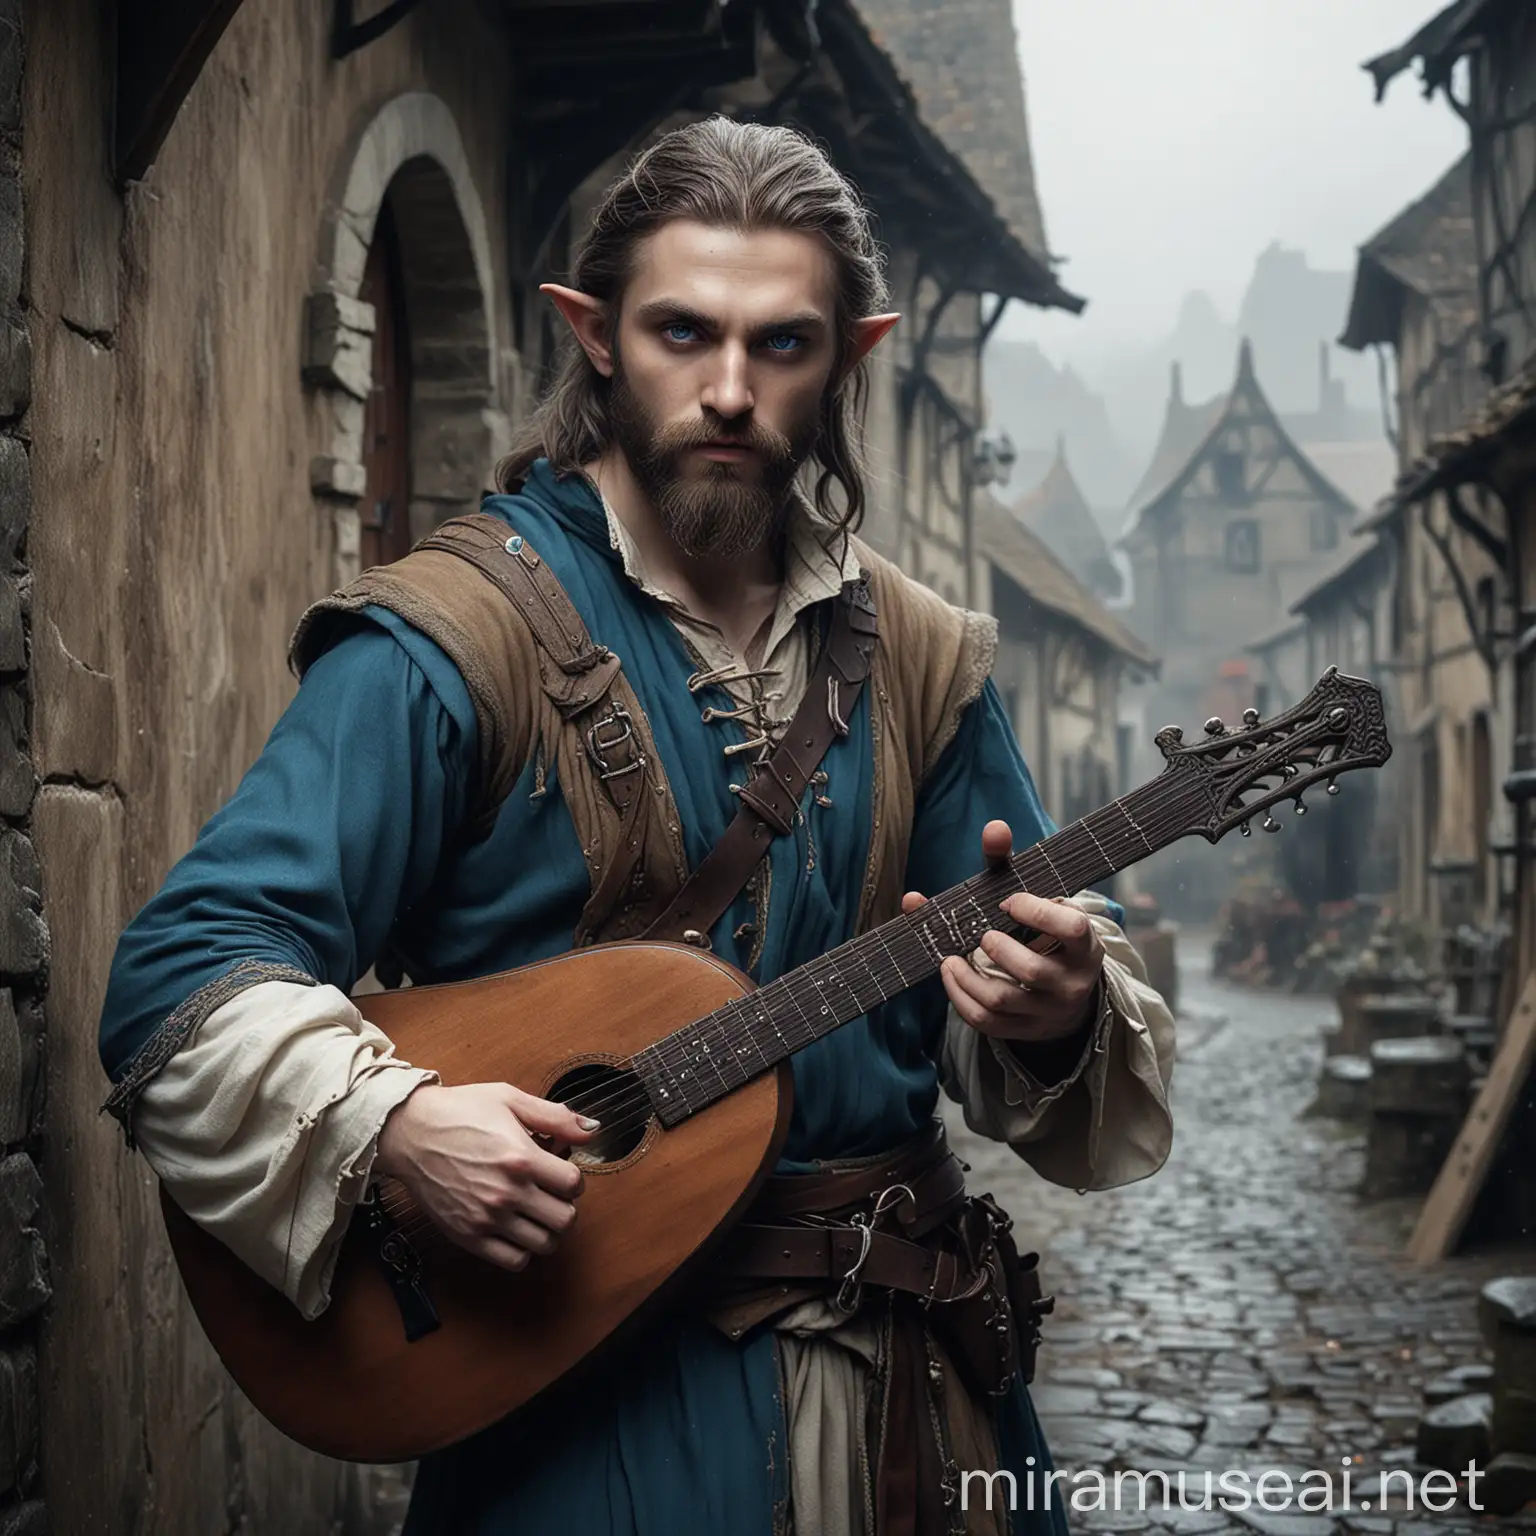 fantasy setting, a blue eyed bearded half elf bard, with a sword on the back, playing a lute in a gloomy medieval village
